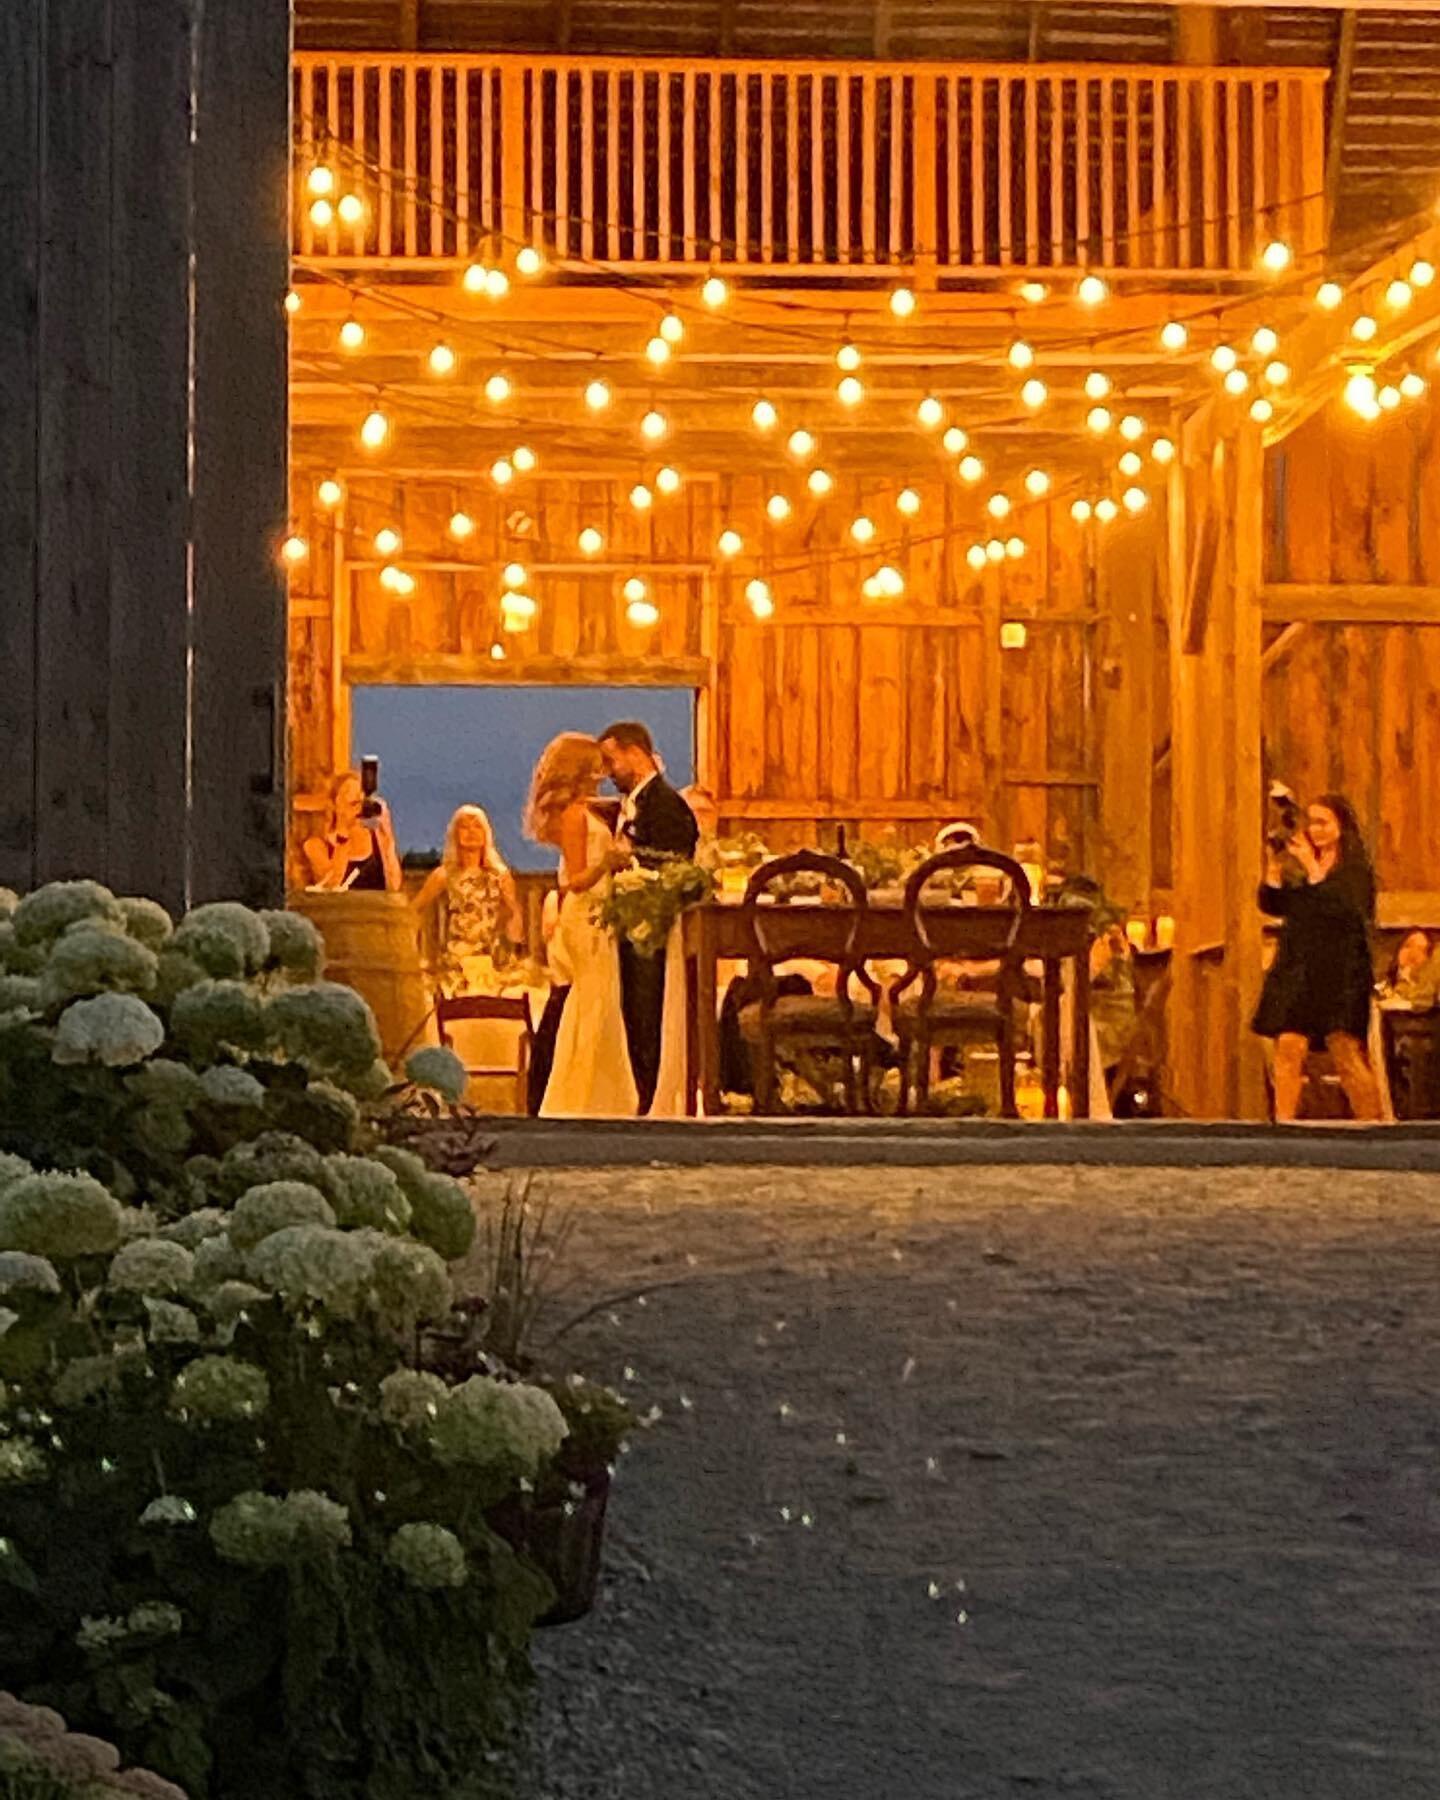 Last night was magical ✨

I couldn&rsquo;t be more happy for Meg &amp; Kev. They were so much fun to work with and so happy their day turned out so great! 

Shout out to the amazing team that brought this day together @kehoeandkin @cityfarmcatering @